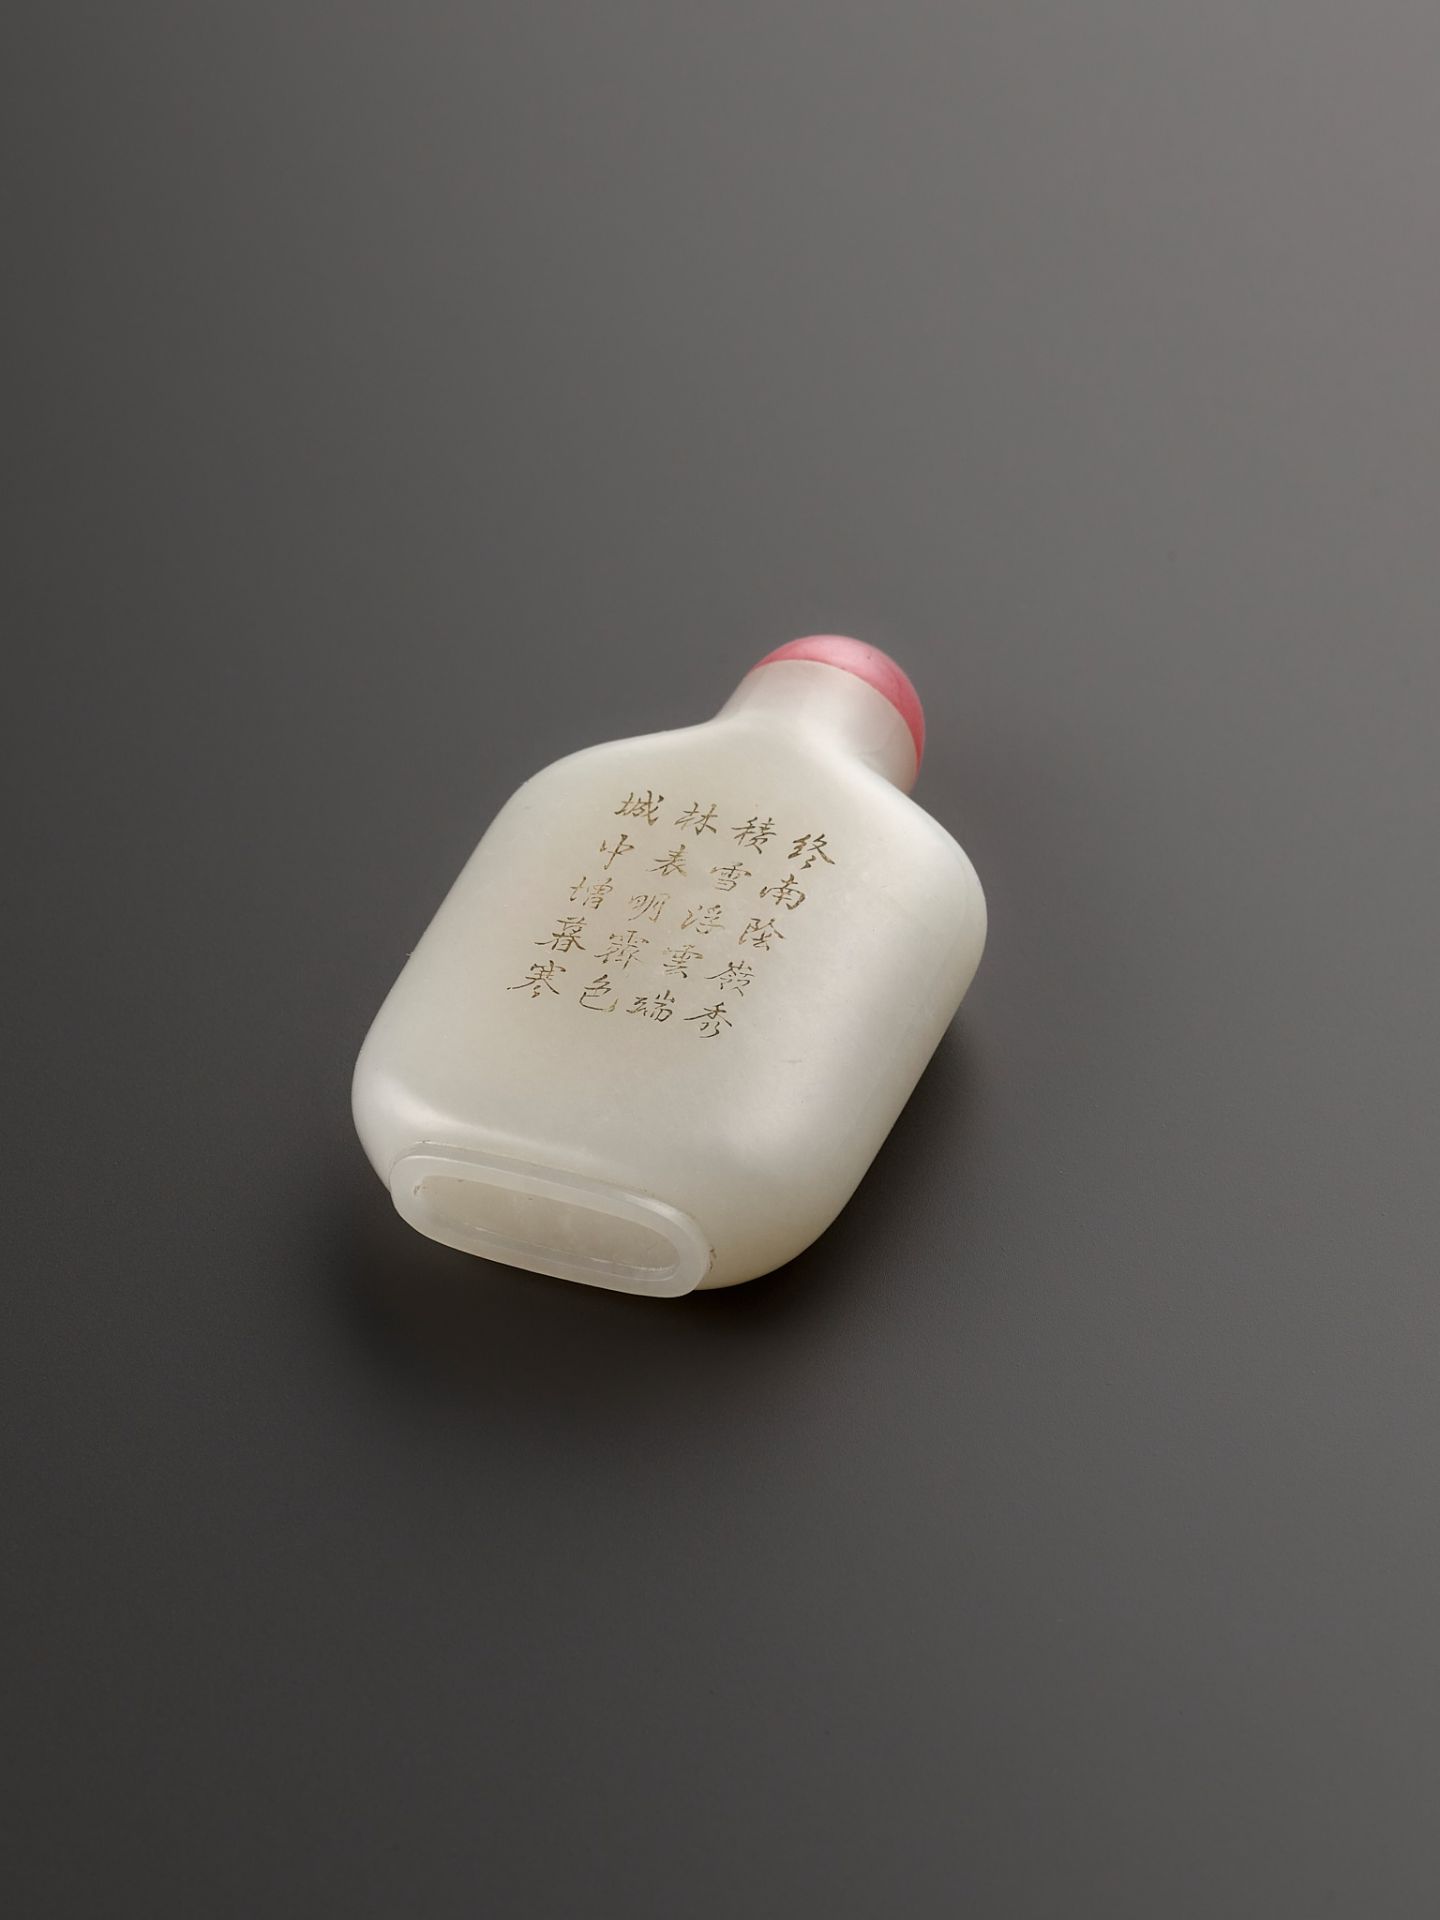 AN INSCRIBED WHITE JADE SNUFF BOTTLE, MID-QING DYNASTY - Image 15 of 15